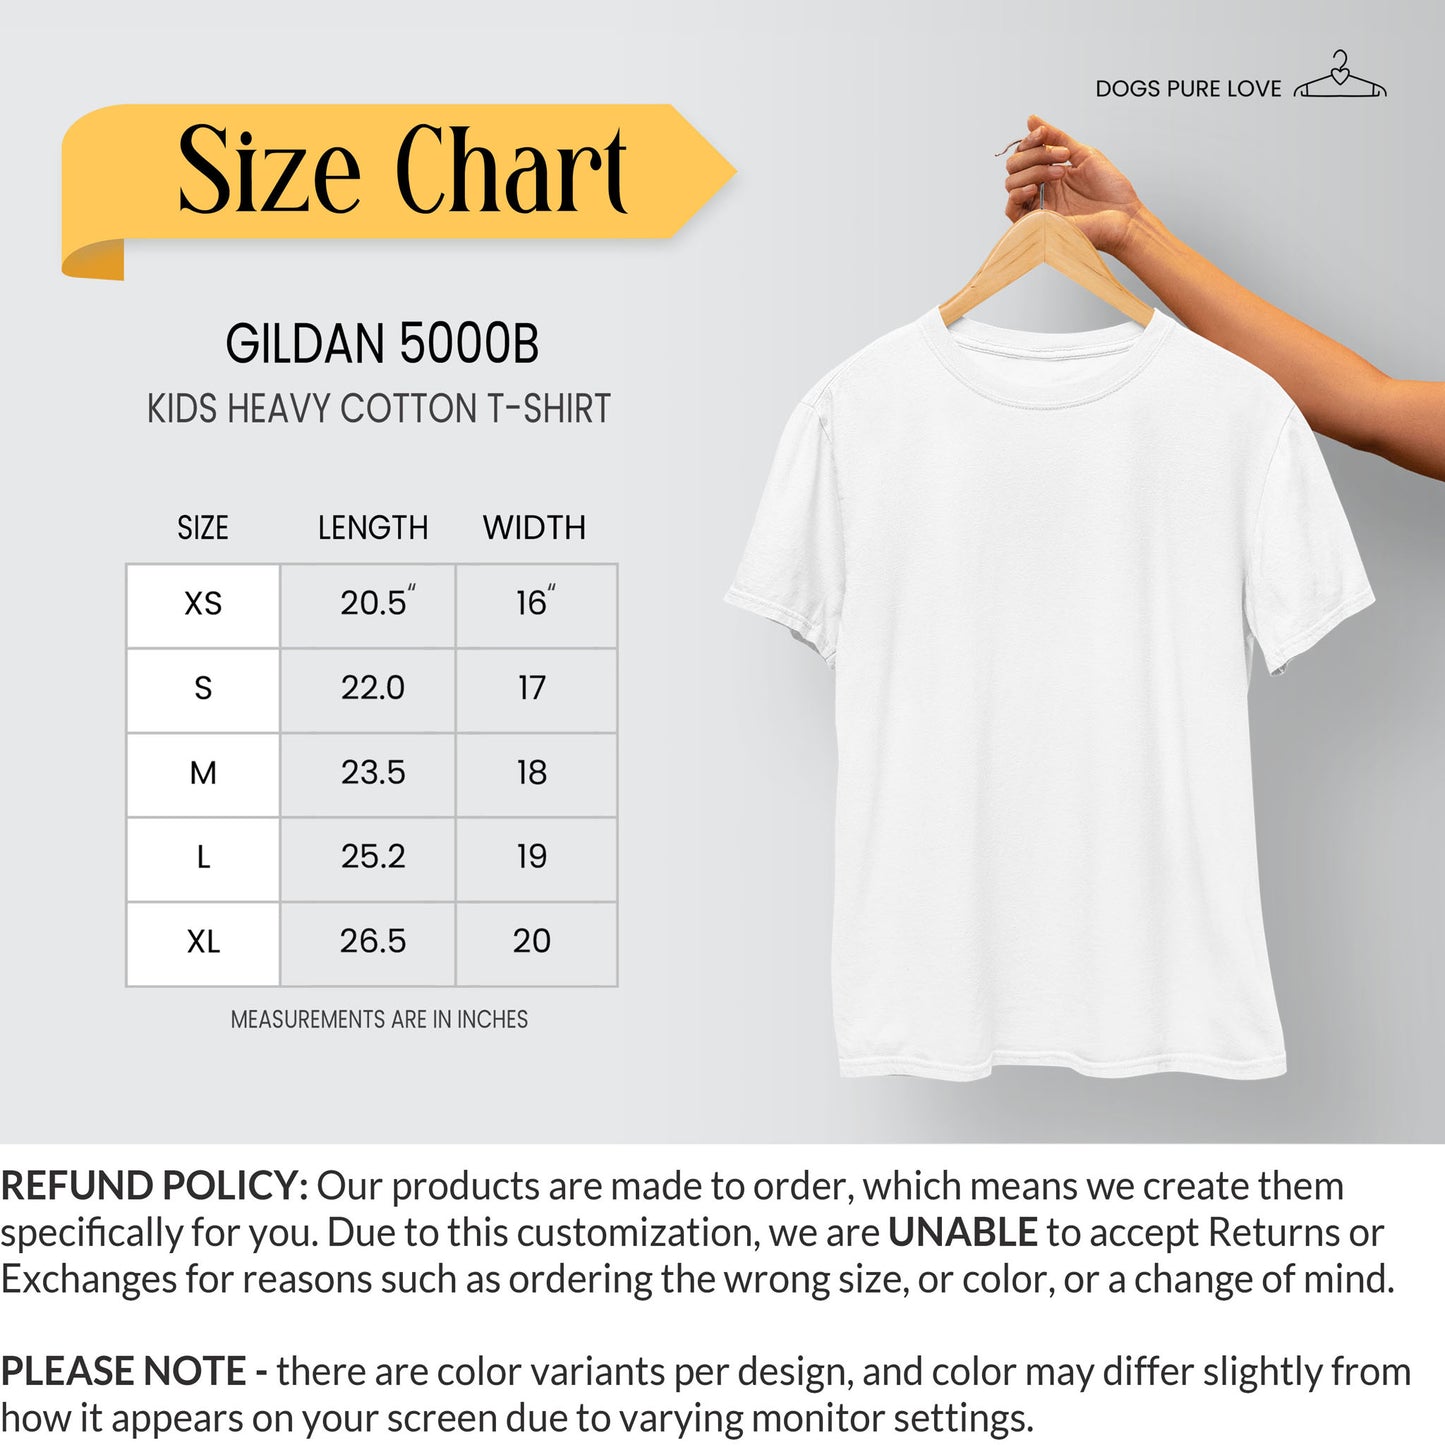 A kids tee size chart by Dogs Pure Love shows measurements and a small Refund Policy description.